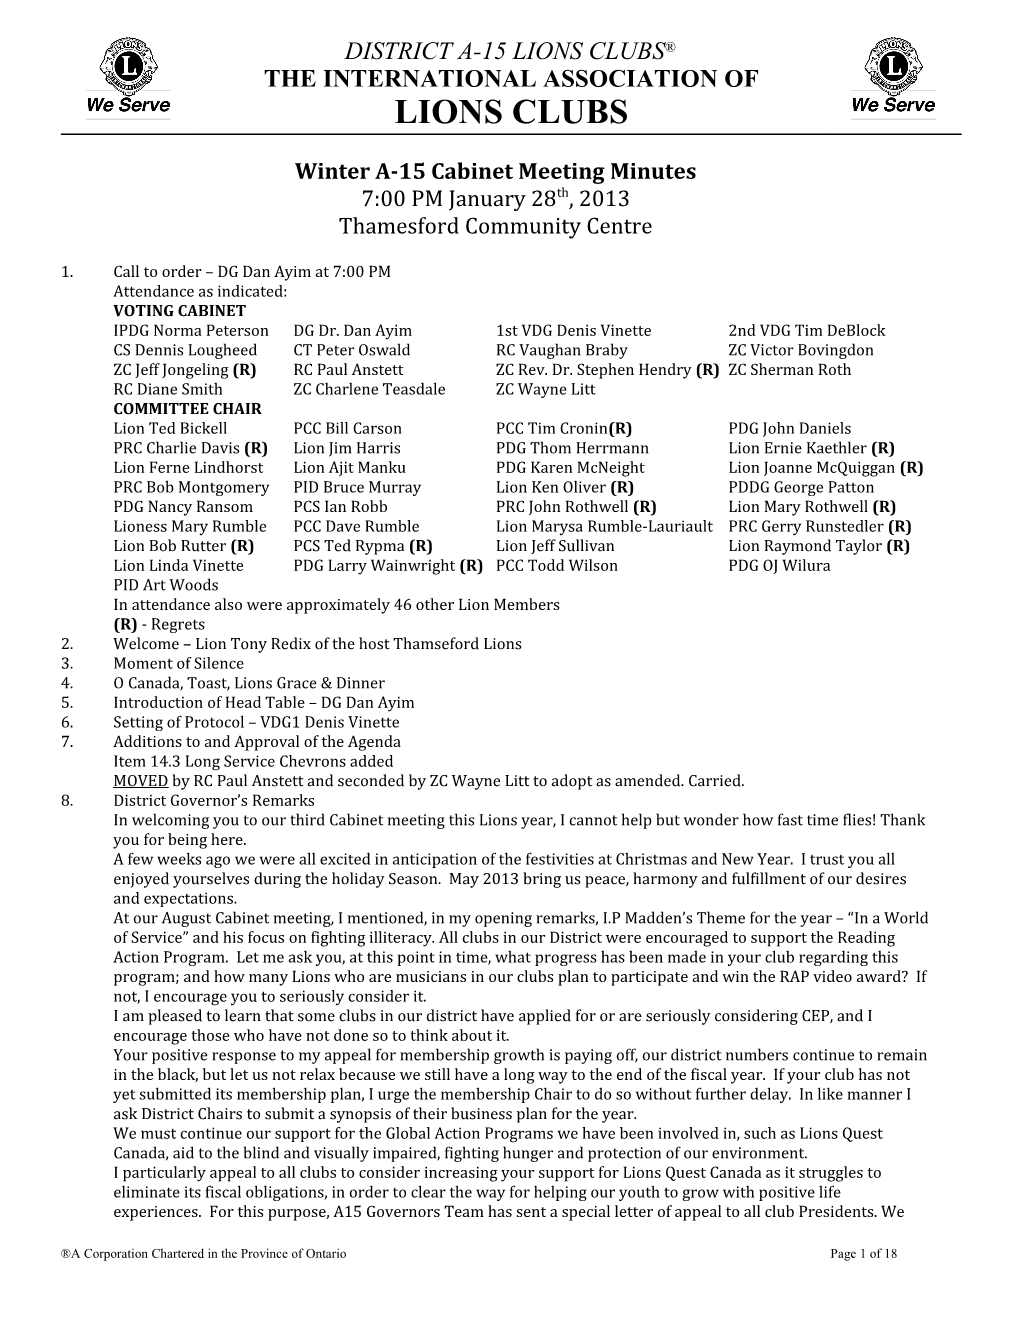 Winter A-15 Cabinet Meeting Minutes